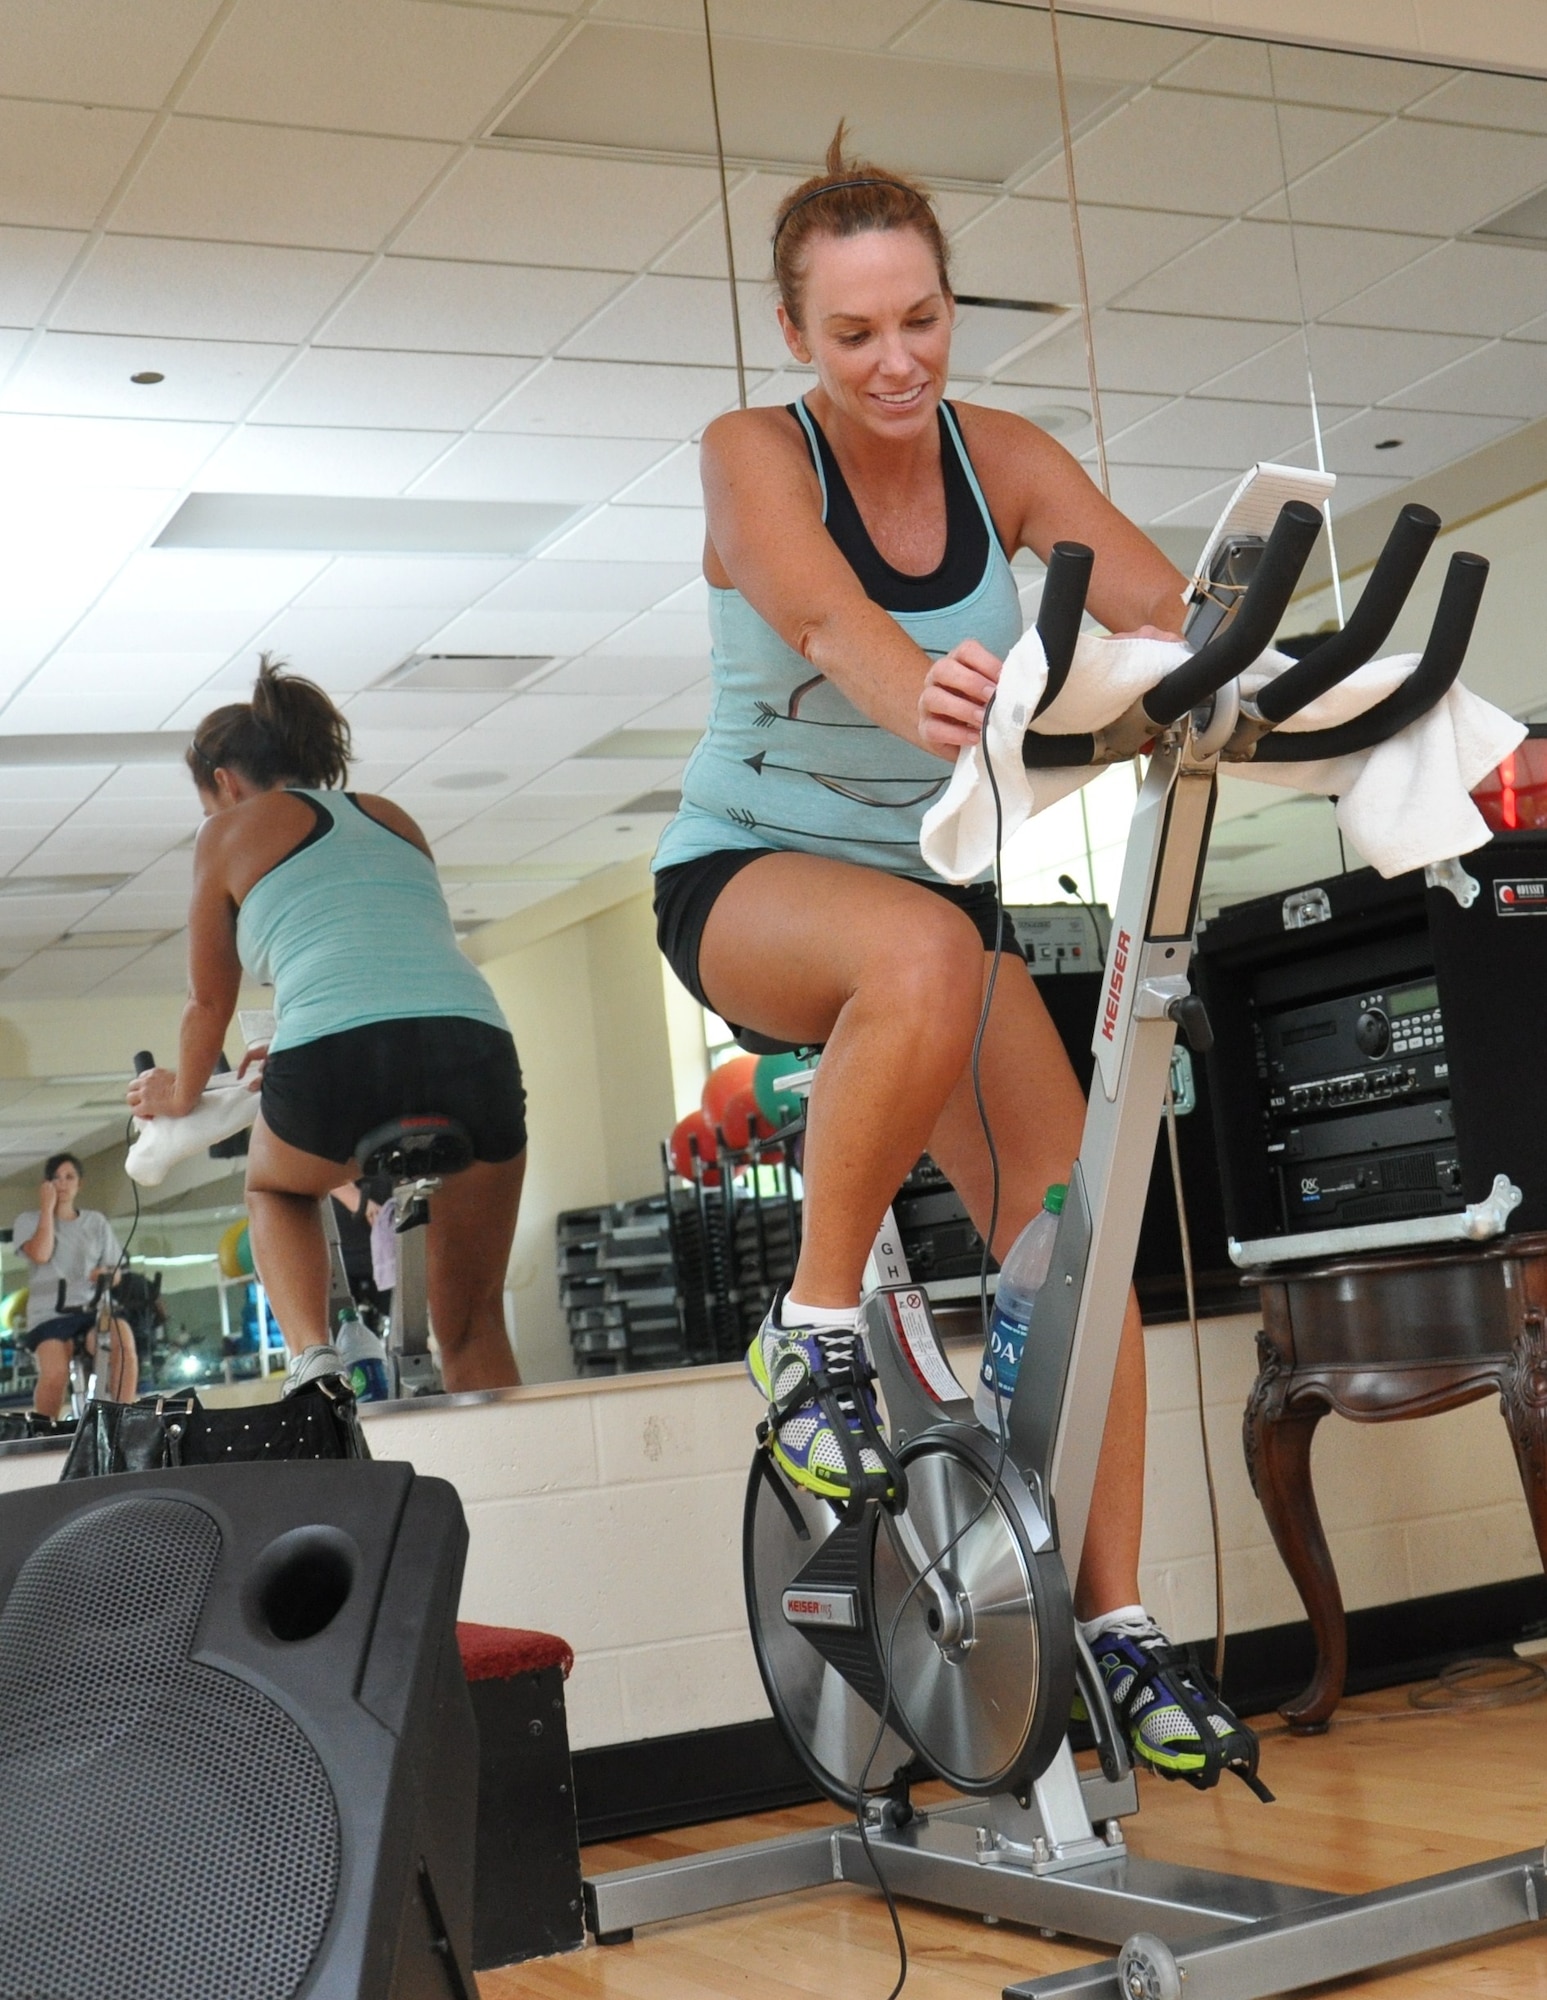 Michele Williamson, Air Force Global Strike Command chief scientist executive support, hops on her bike to teach a spin class at the Barksdale Fitness Center May 2. Williamson, whose husband is currently deployed, finds support from the military spouses on base. (U.S. Air Force photo by Kate Blais)